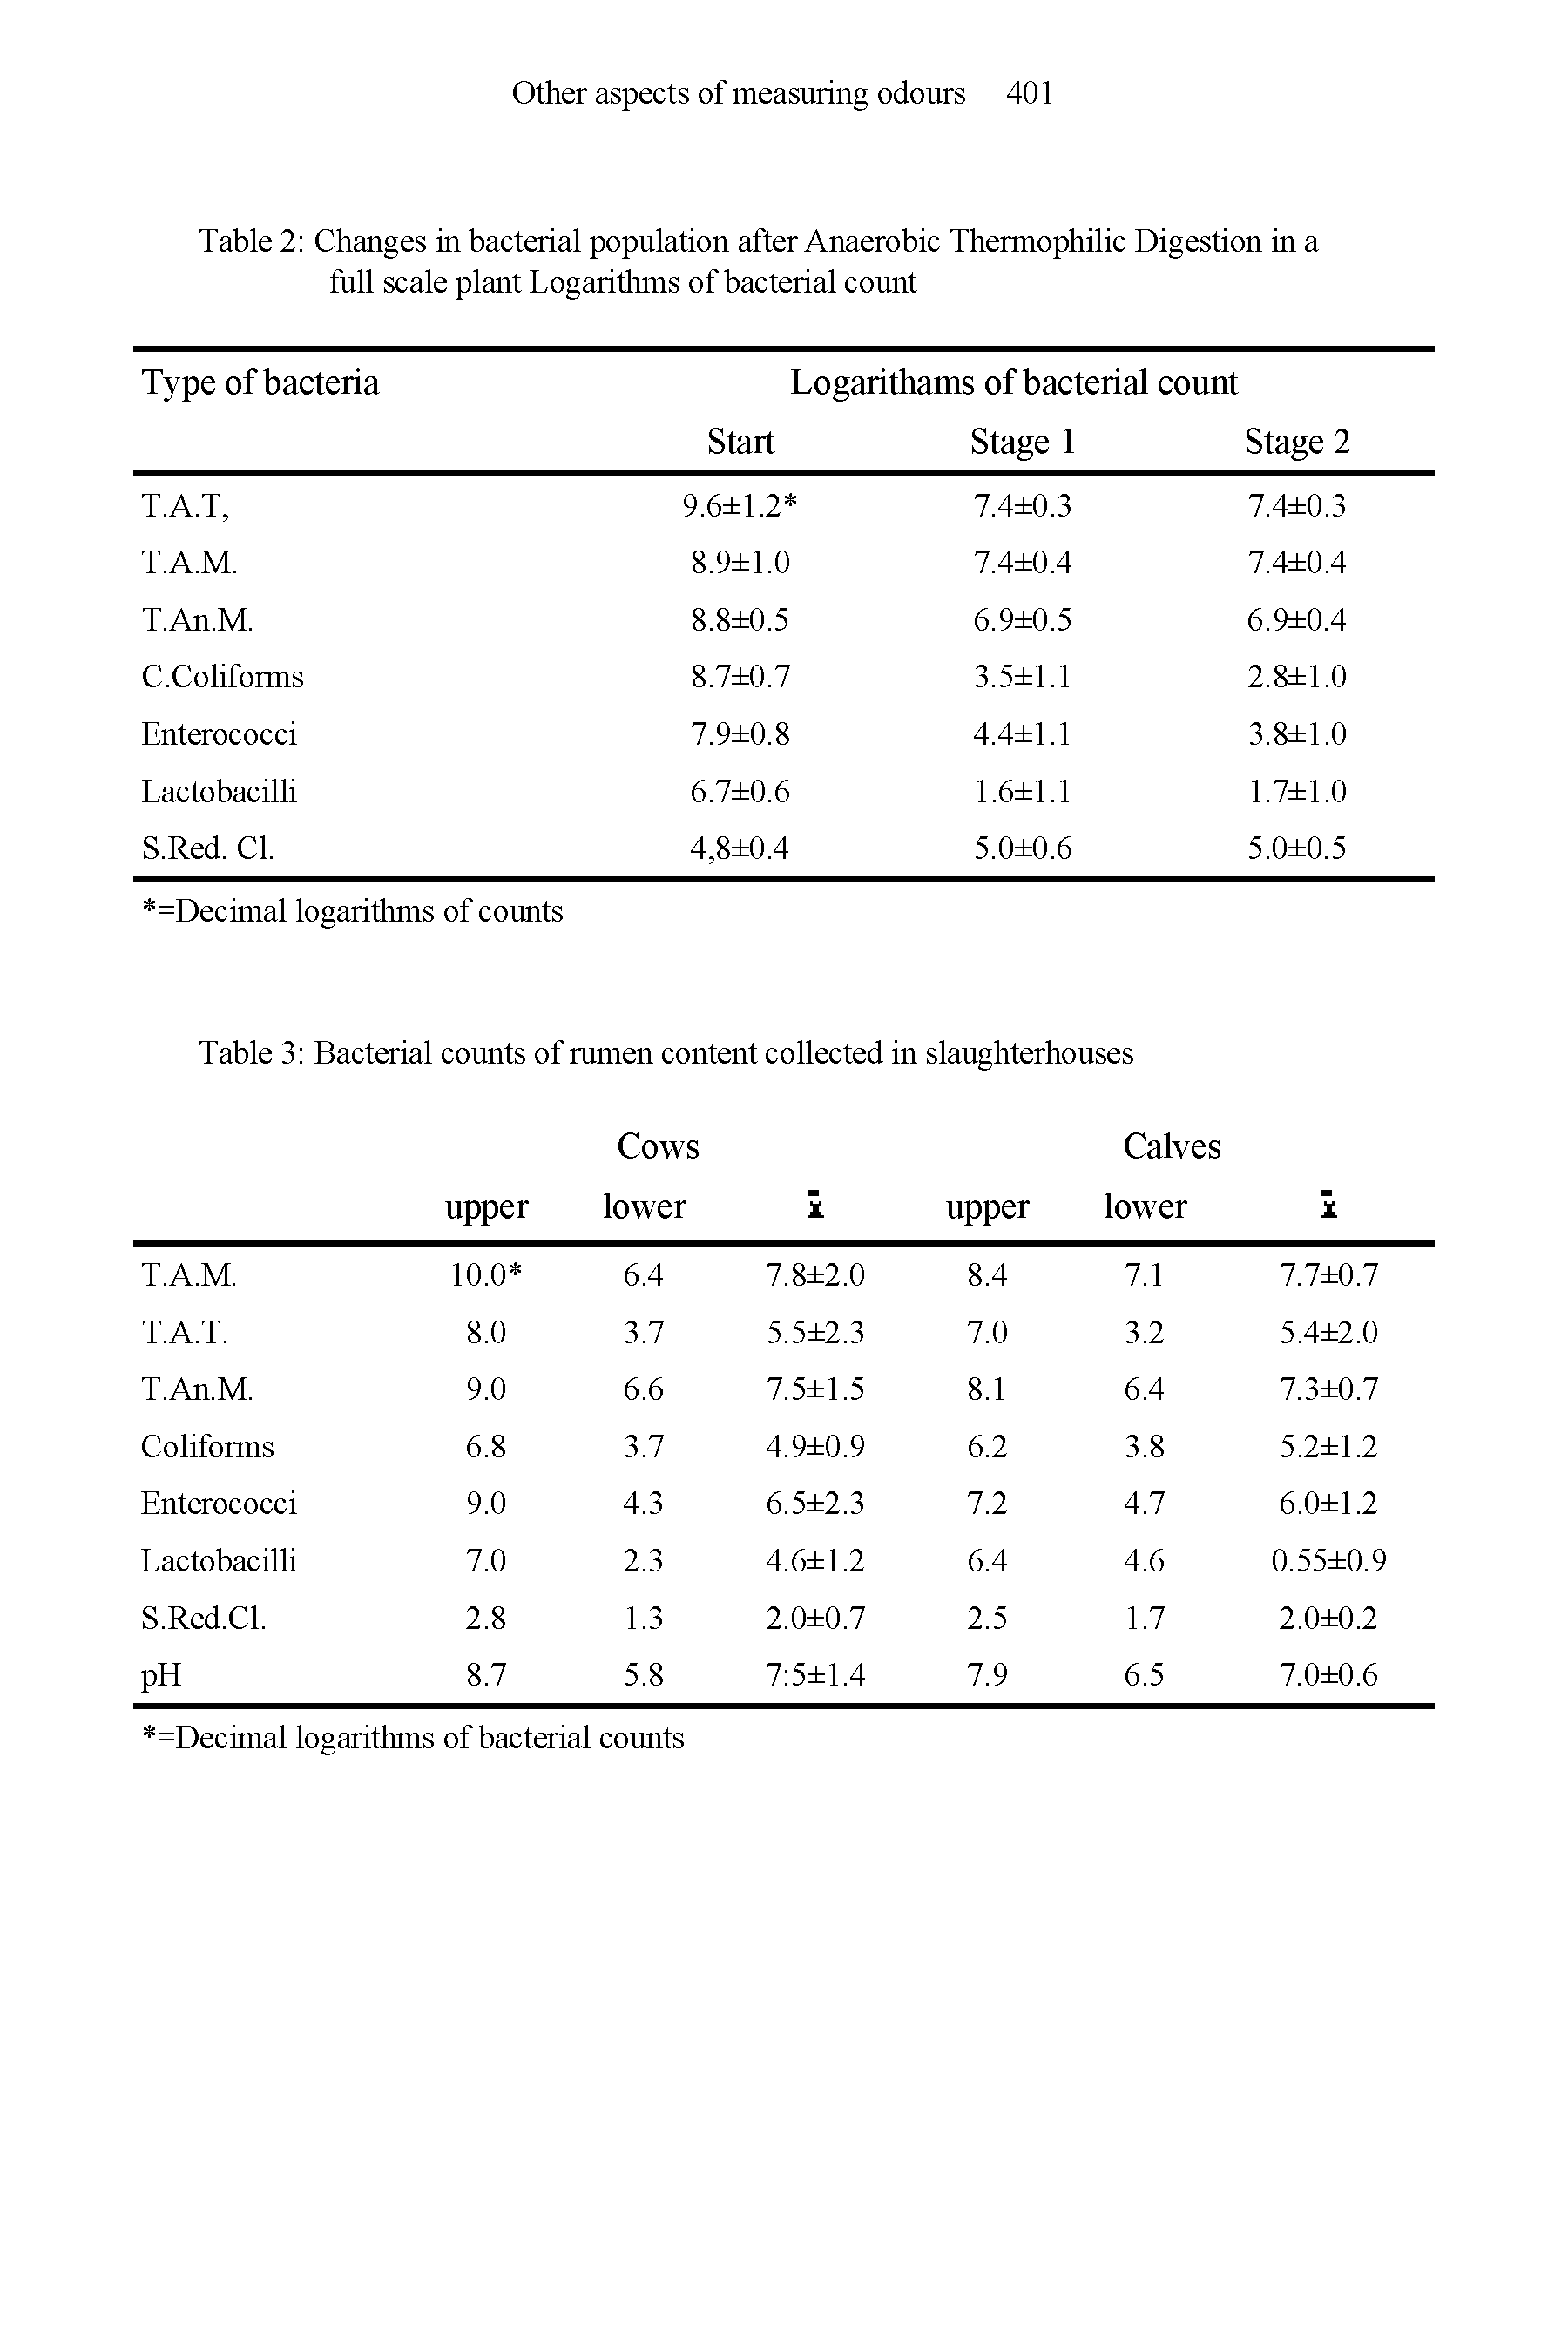 Table 2 Changes in bacterial population after Anaerobic Thermophilic Digestion in a full scale plant Logarithms of bacterial count...